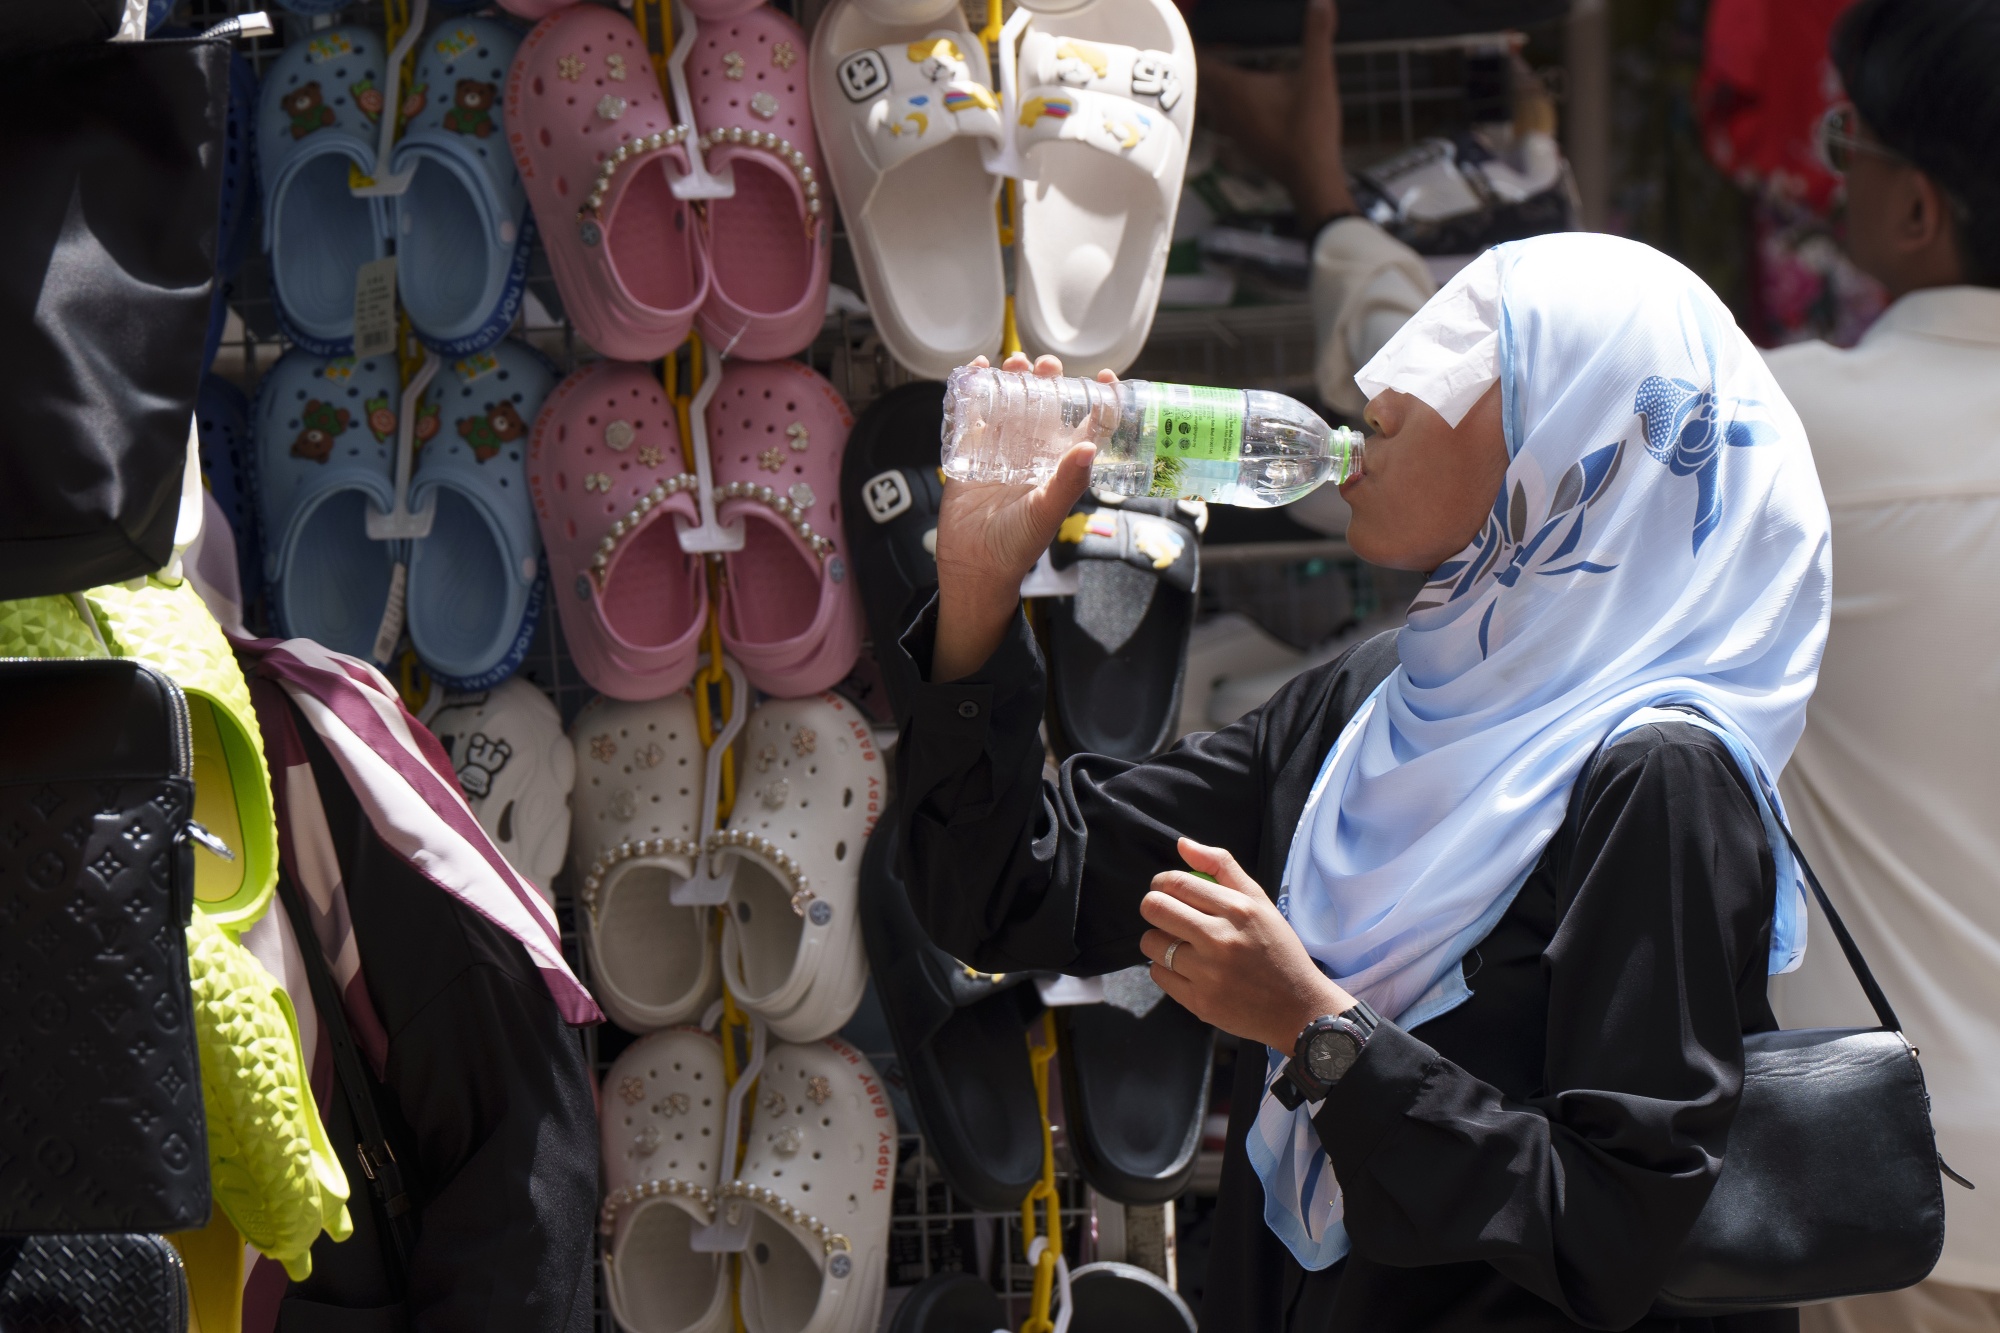 Malaysia Rules Out Need to Declare Heat Wave Emergency: Mail - Bloomberg